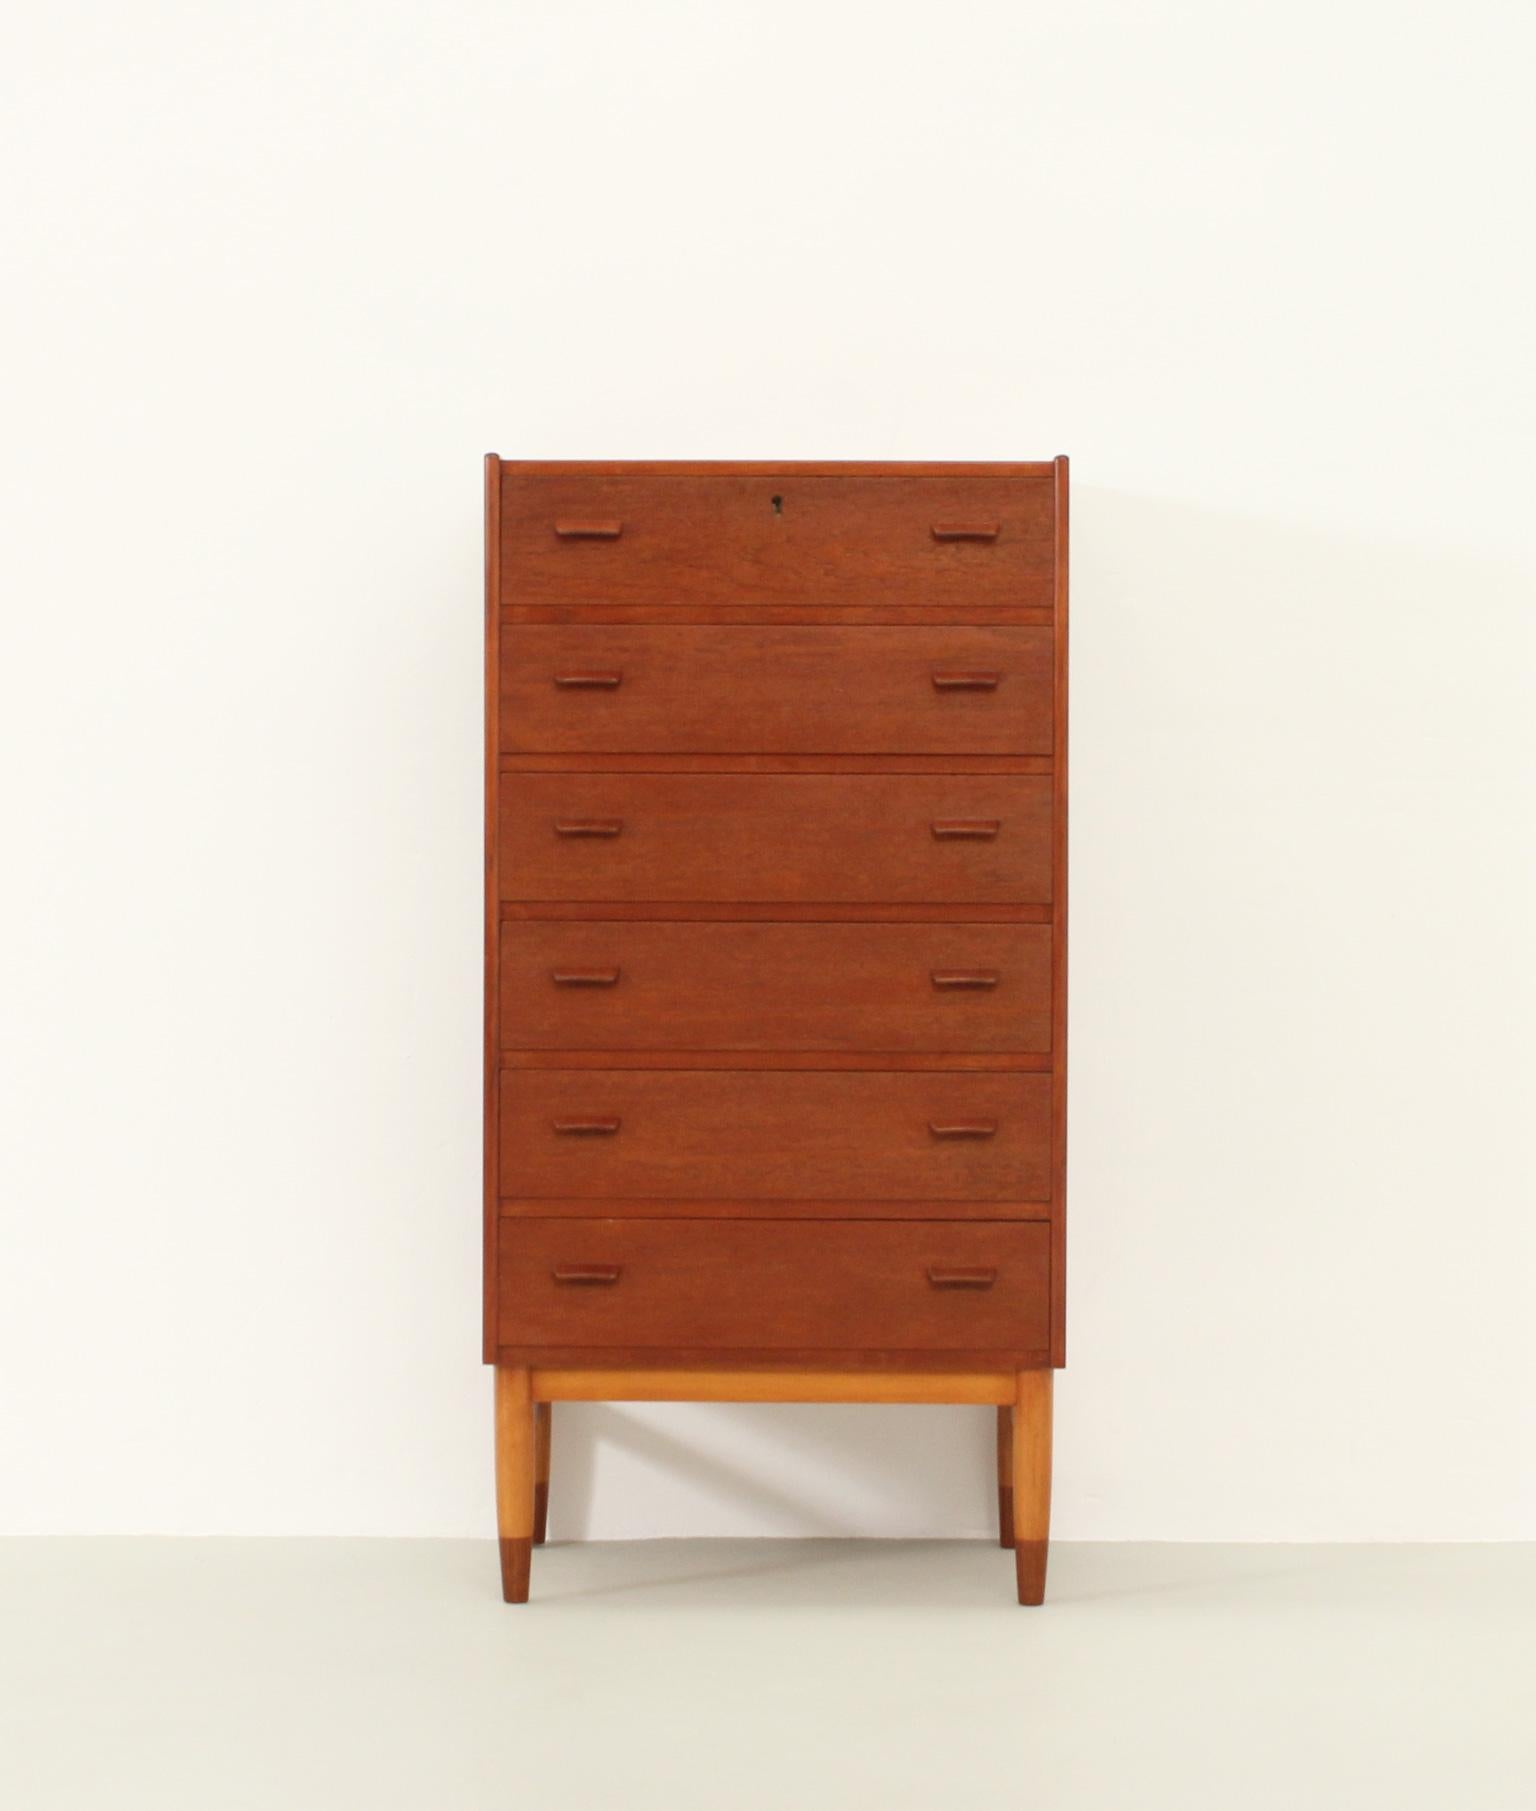 Scandinavian Modern Chest of Drawers by Carl Aage Skov for Munch Møbler, 1957 For Sale